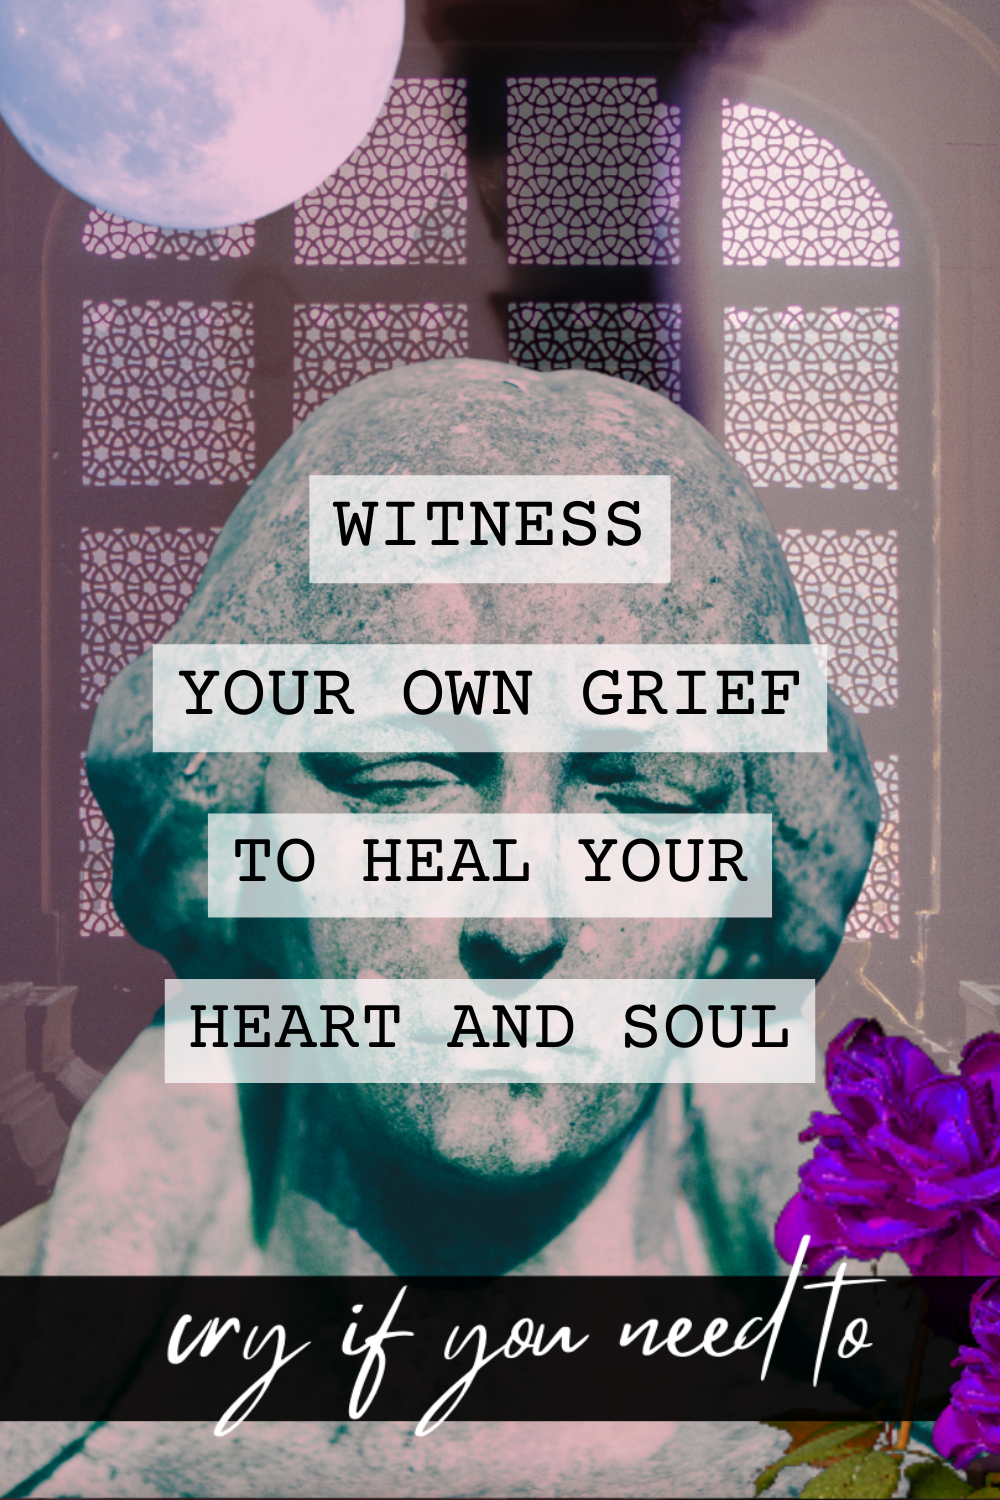 Witness Your Own Grief to Heal Your Heart and Soul, with an expression of sadness